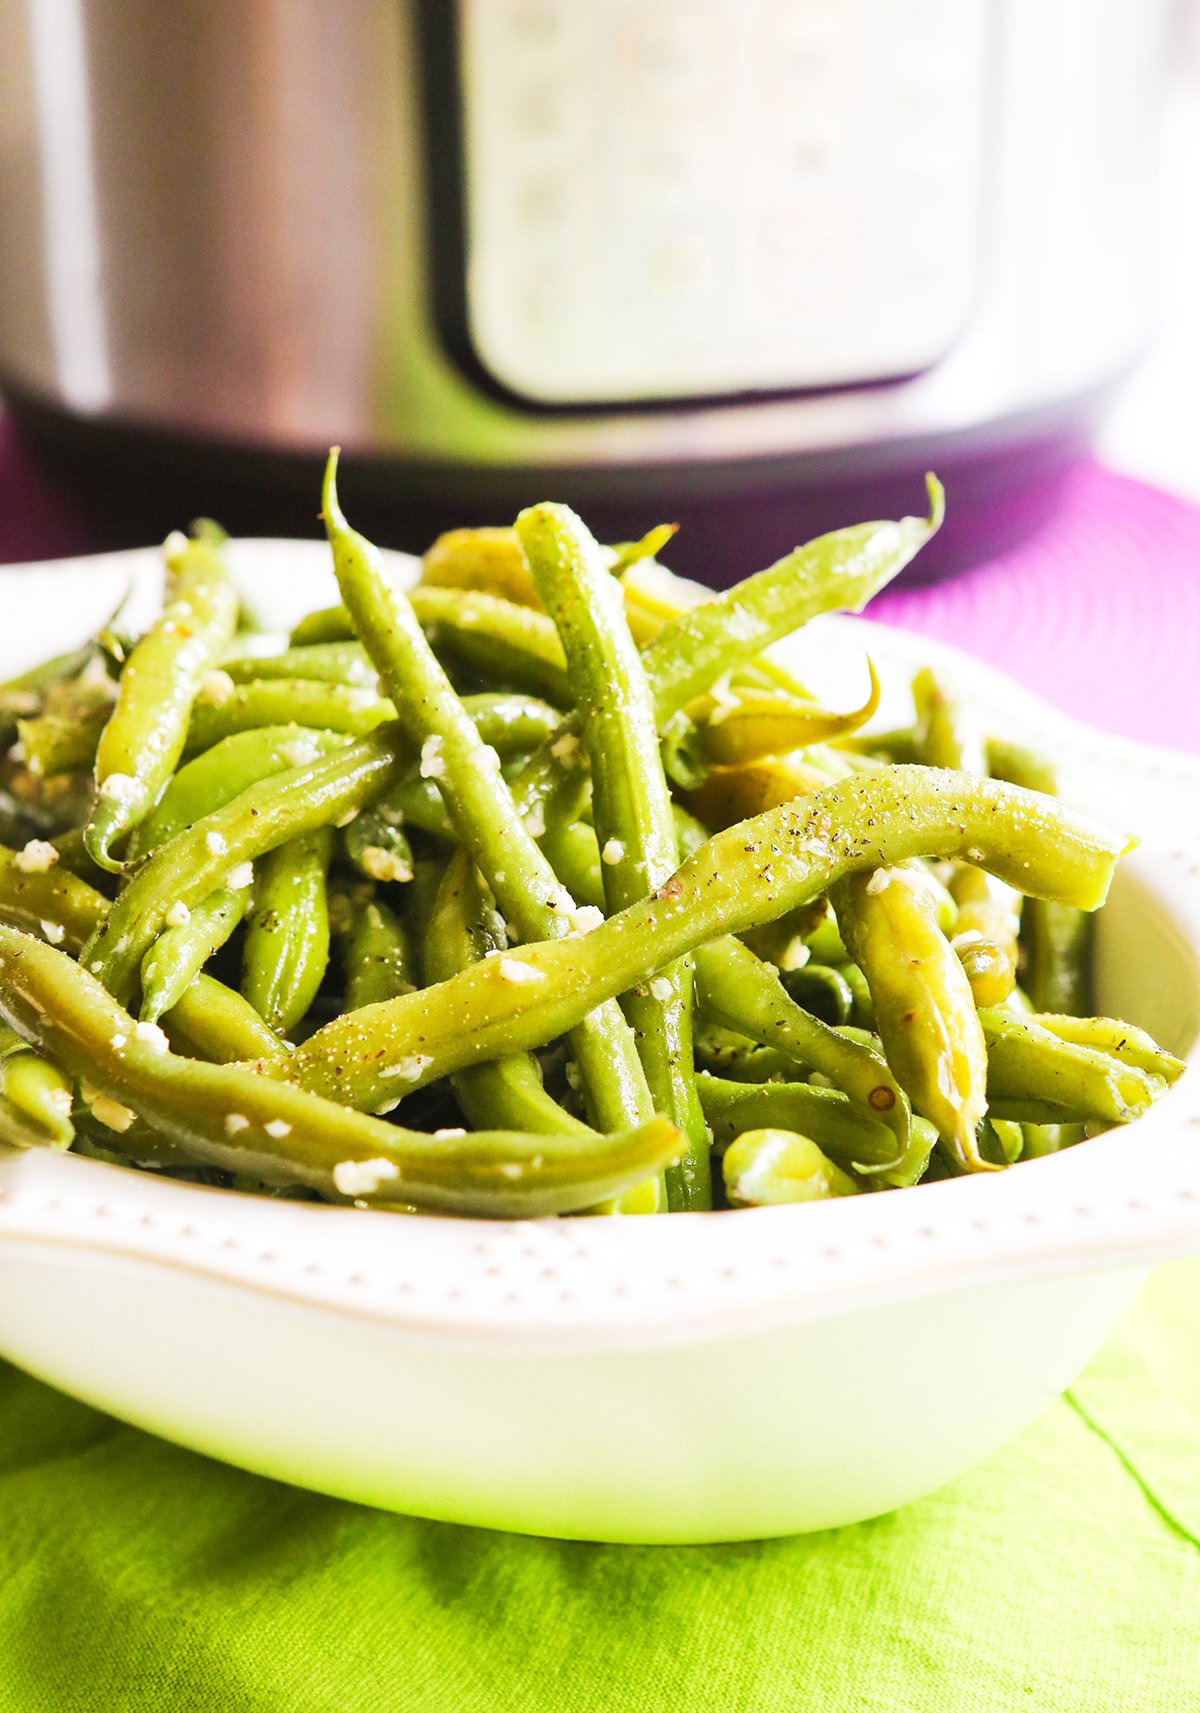 Serving dish filled with cooked green beans and garlic sitting next to an instant pot.